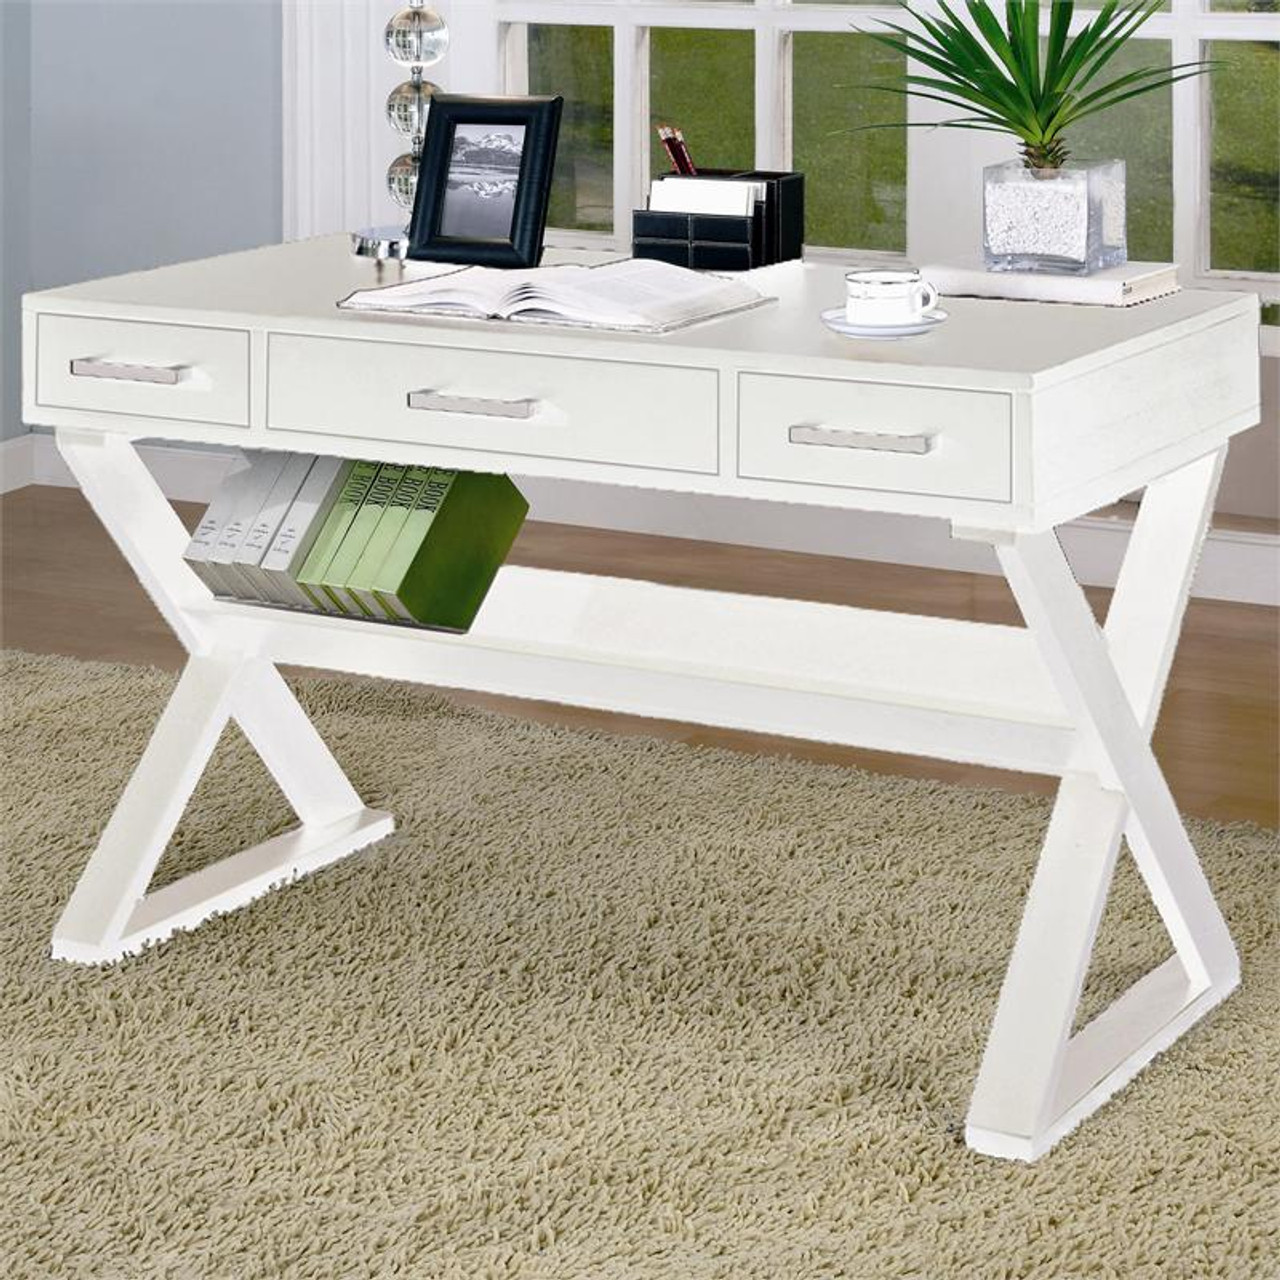 31 inch Simple Writing Vanity Desk with 2 Drawers for Home Office Bedroom  ,White